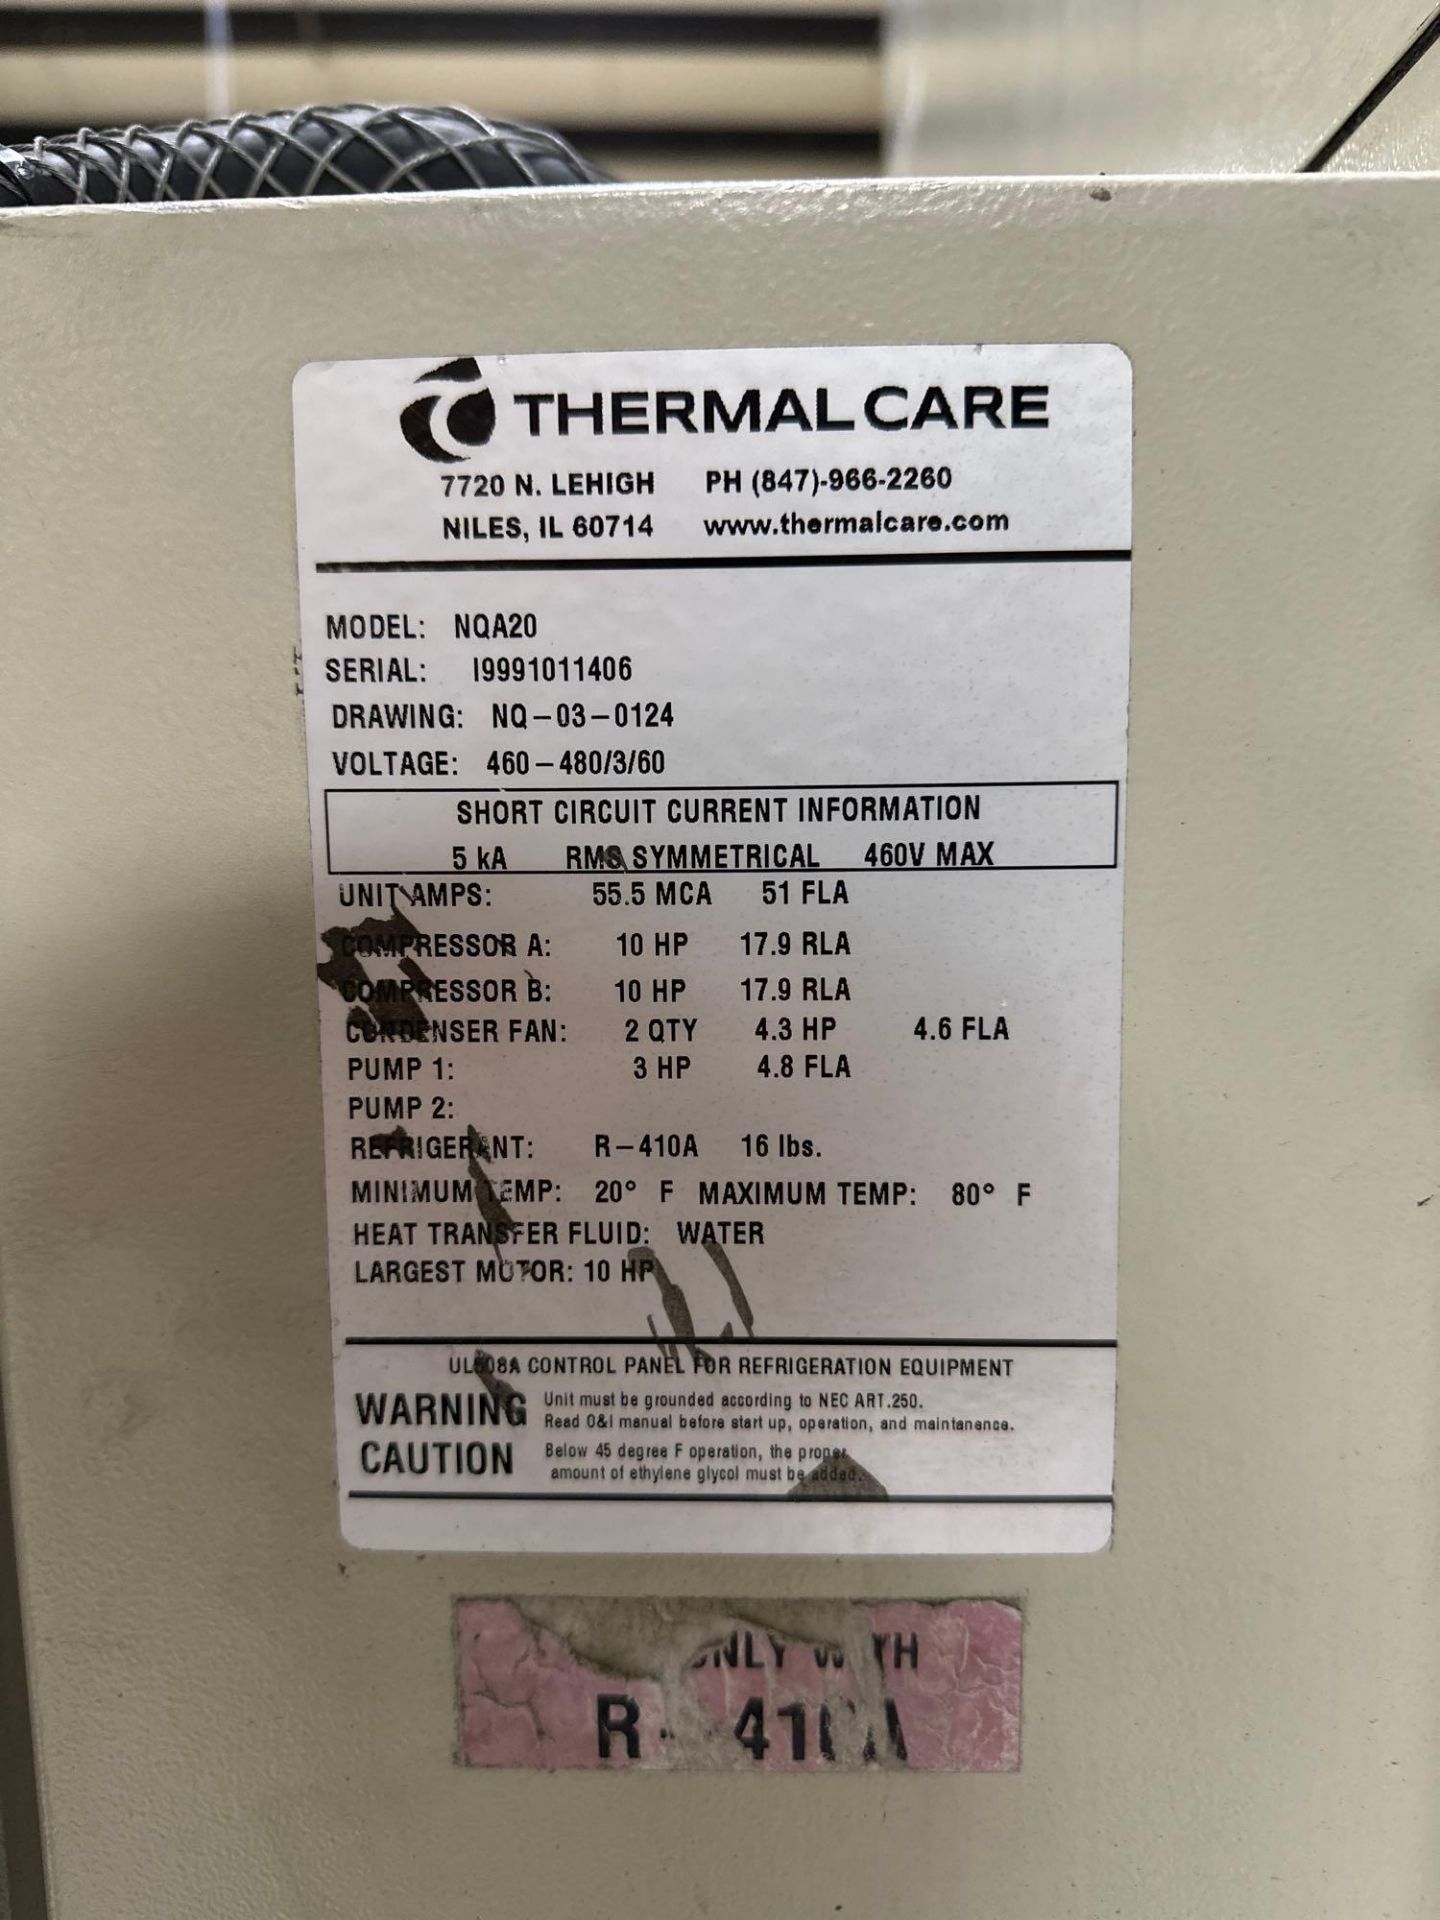 Thermal Care NQA20 Chiller, s/n I9991011406 - Image 7 of 7